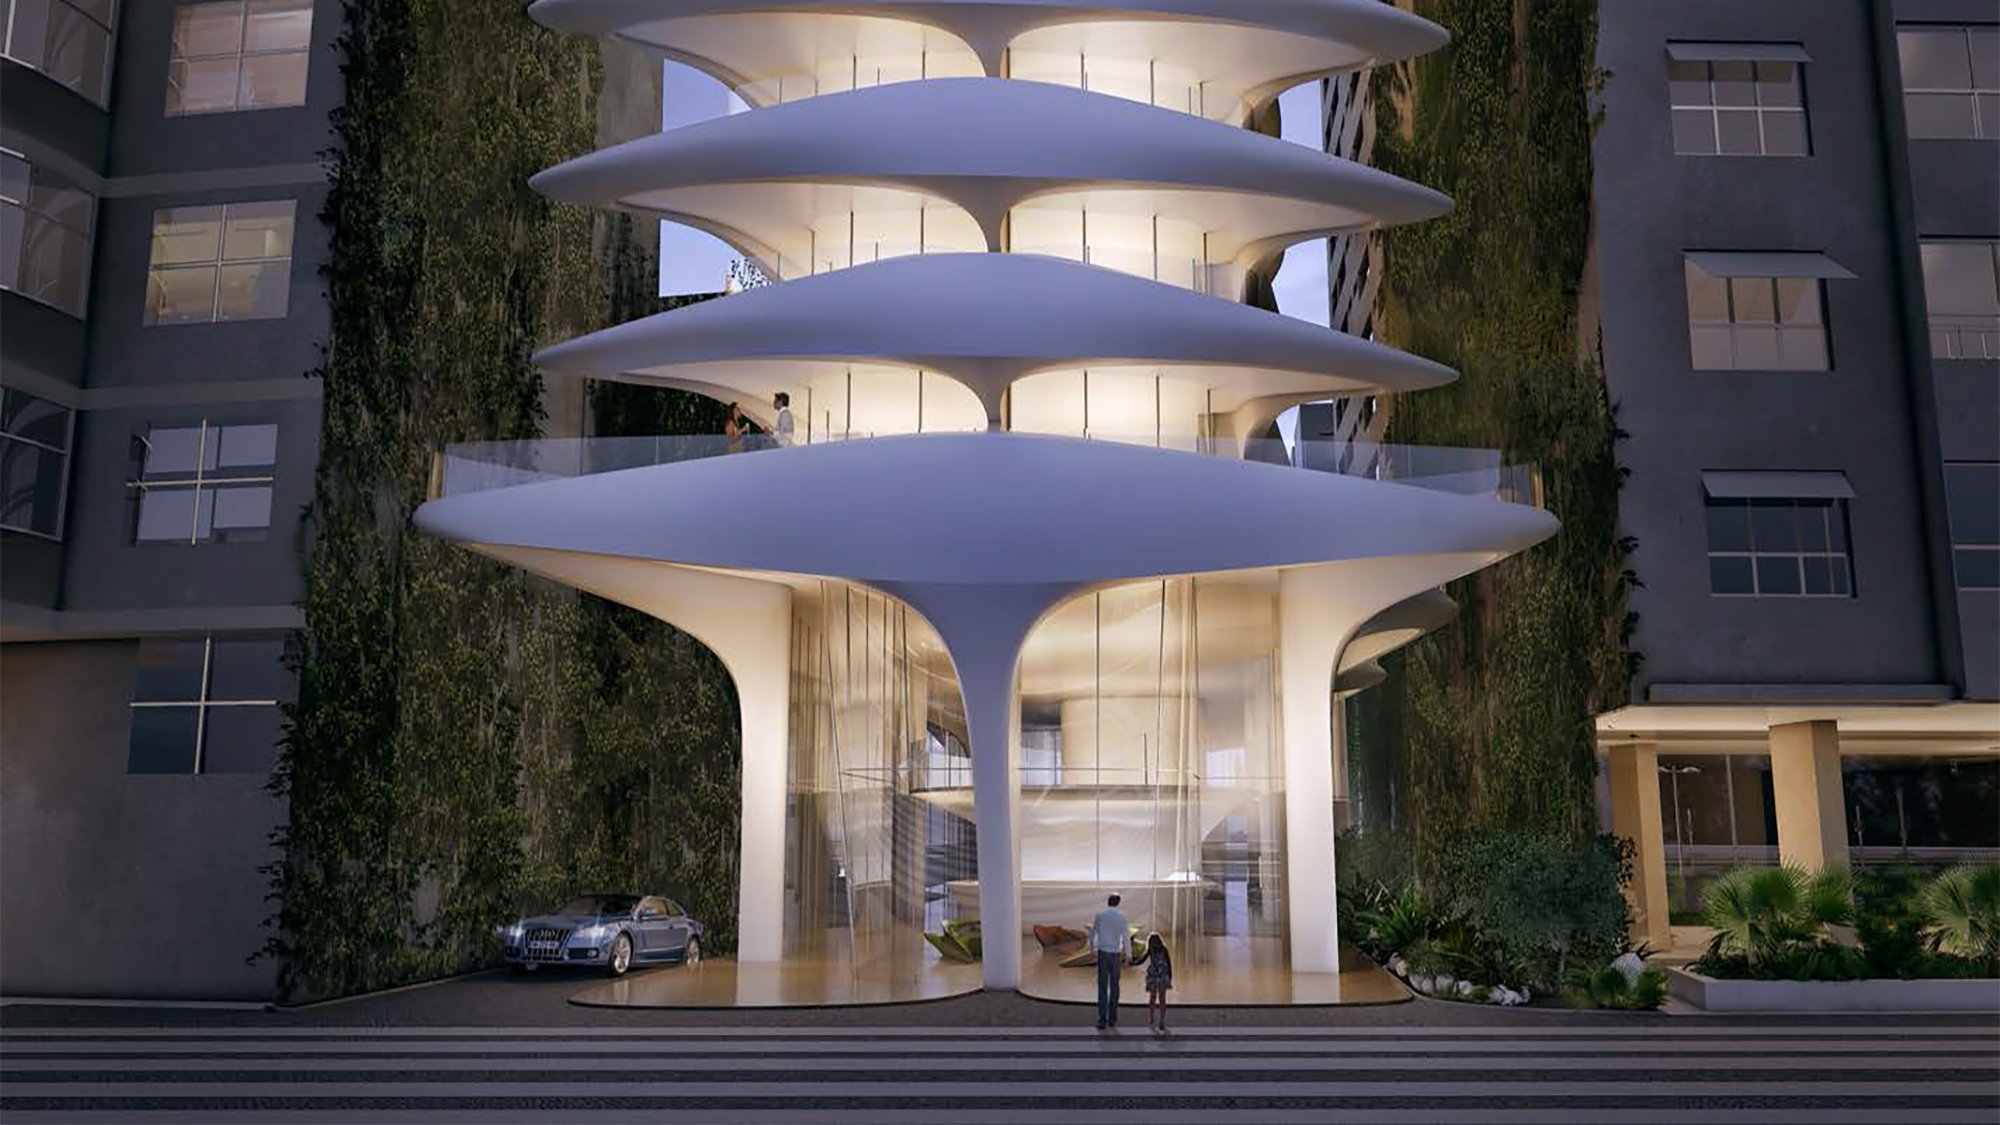 The Casa Atlantica project is being designed as a luxury residential building in Copacabana. Image: Zaha Hadid